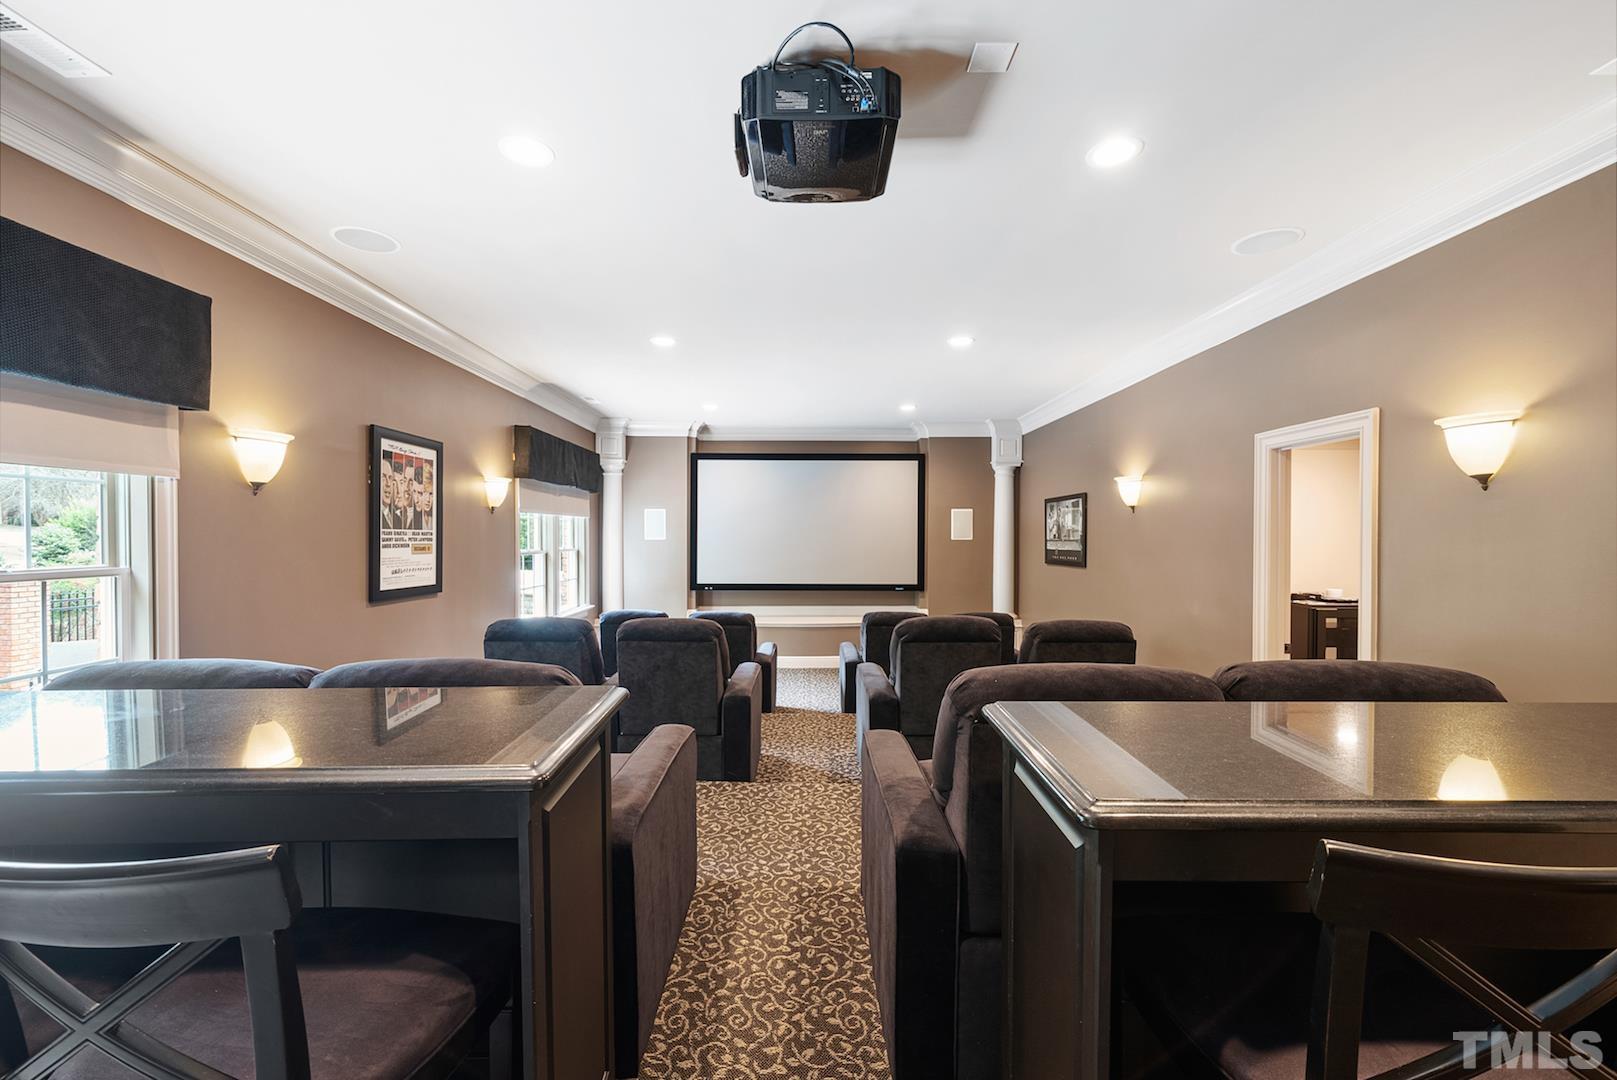 12 Seat Home Theater